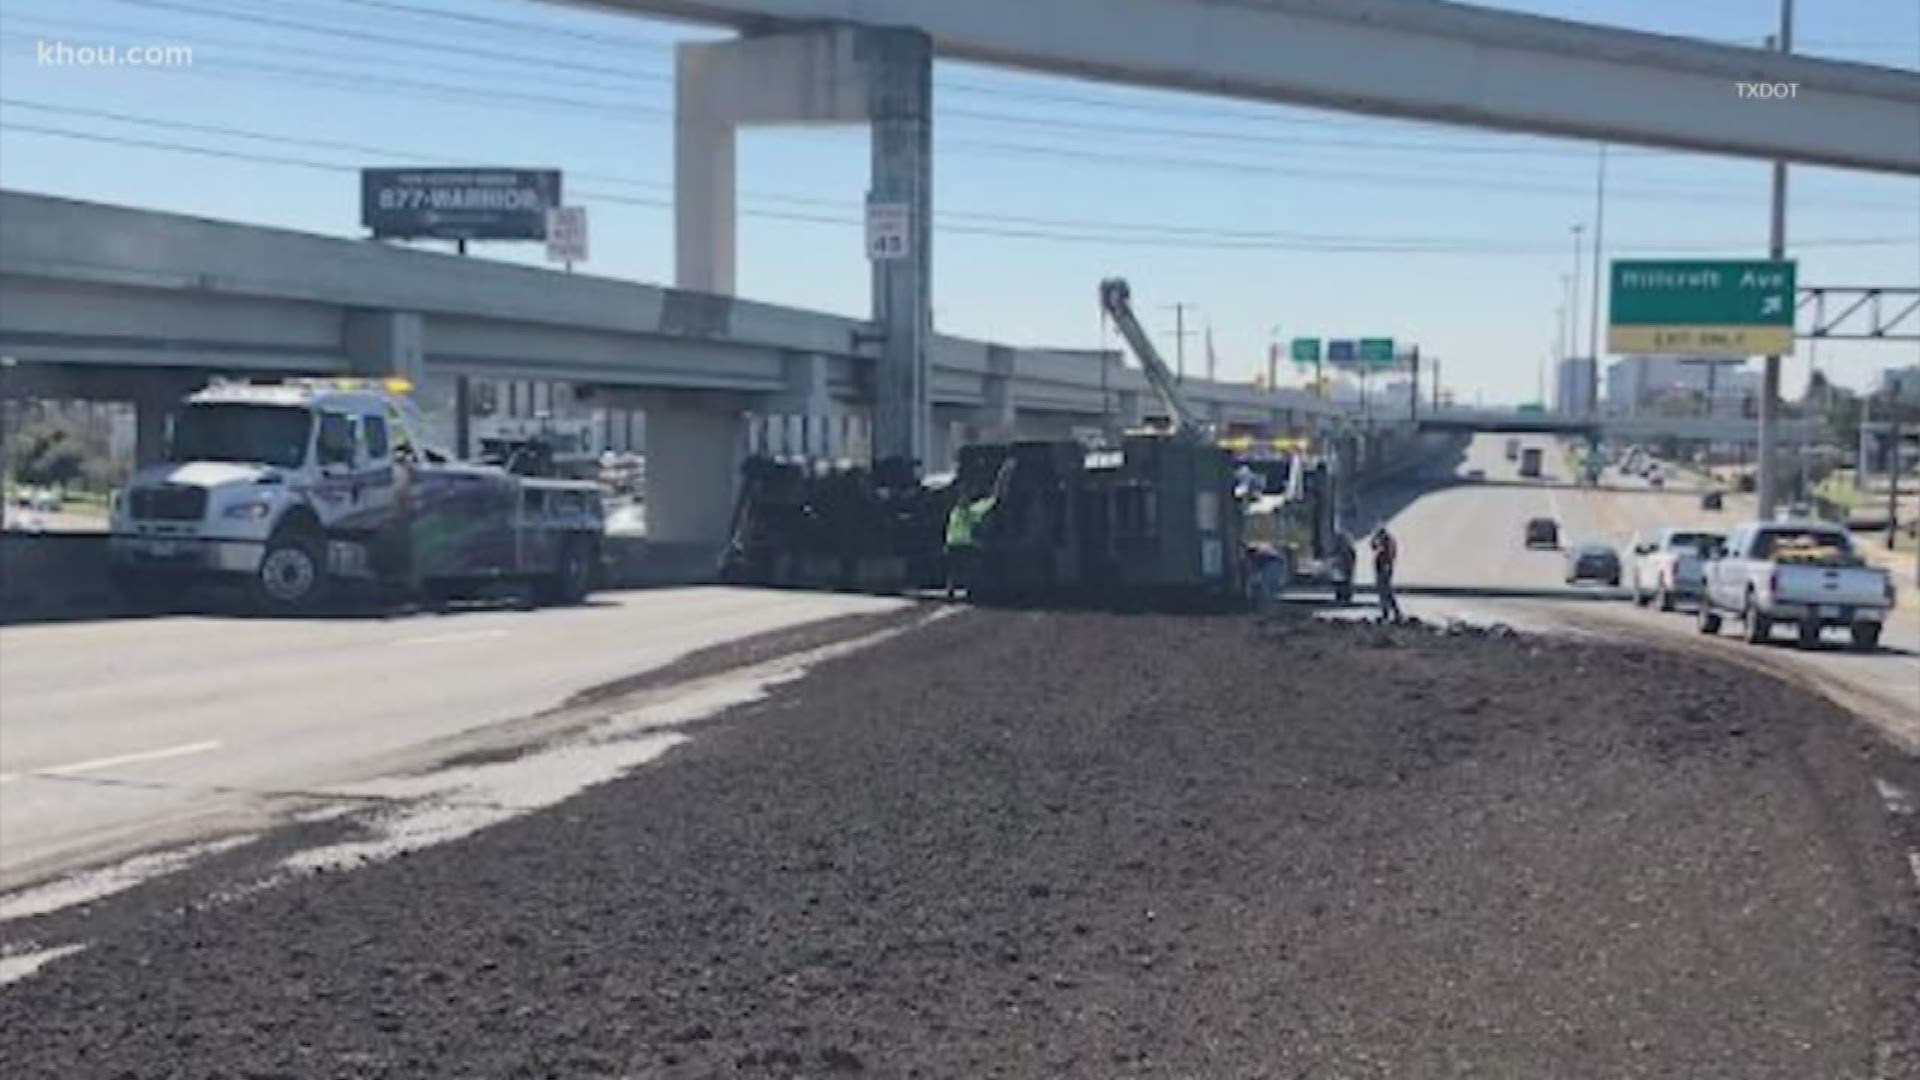 A truck carrying raw sewage overturned on the Southwest Freeway Friday afternoon making a mess of rush hour traffic.